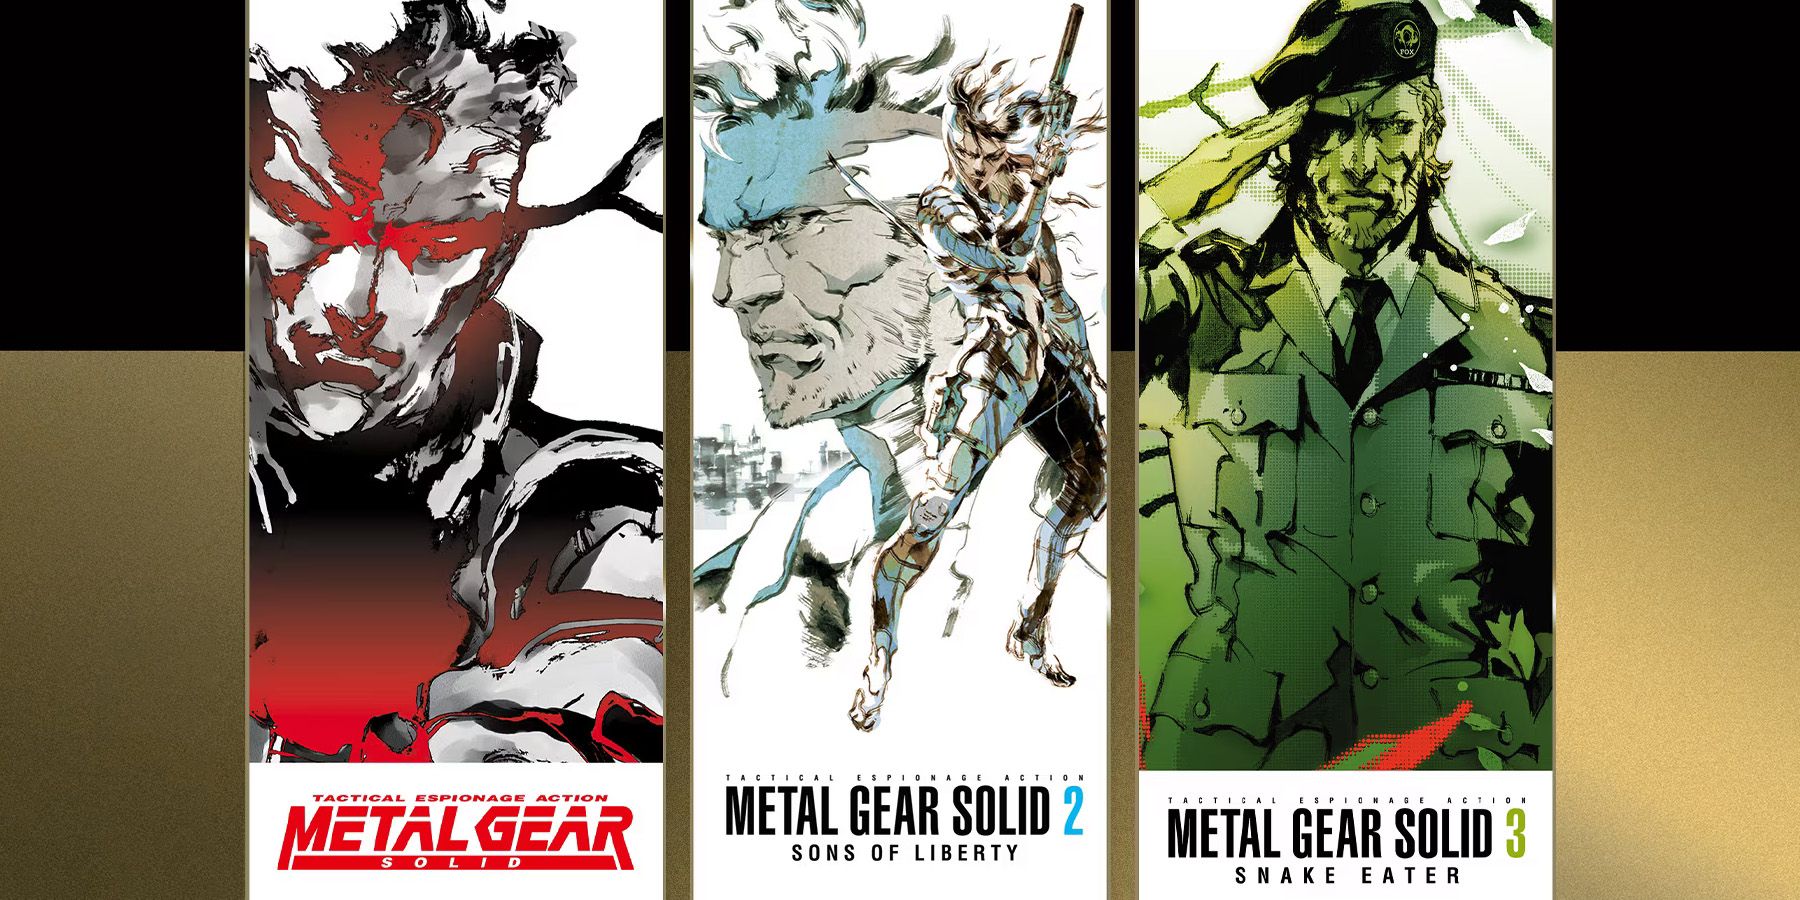 Metal Gear Solid: Master Collection Release Date Set for October